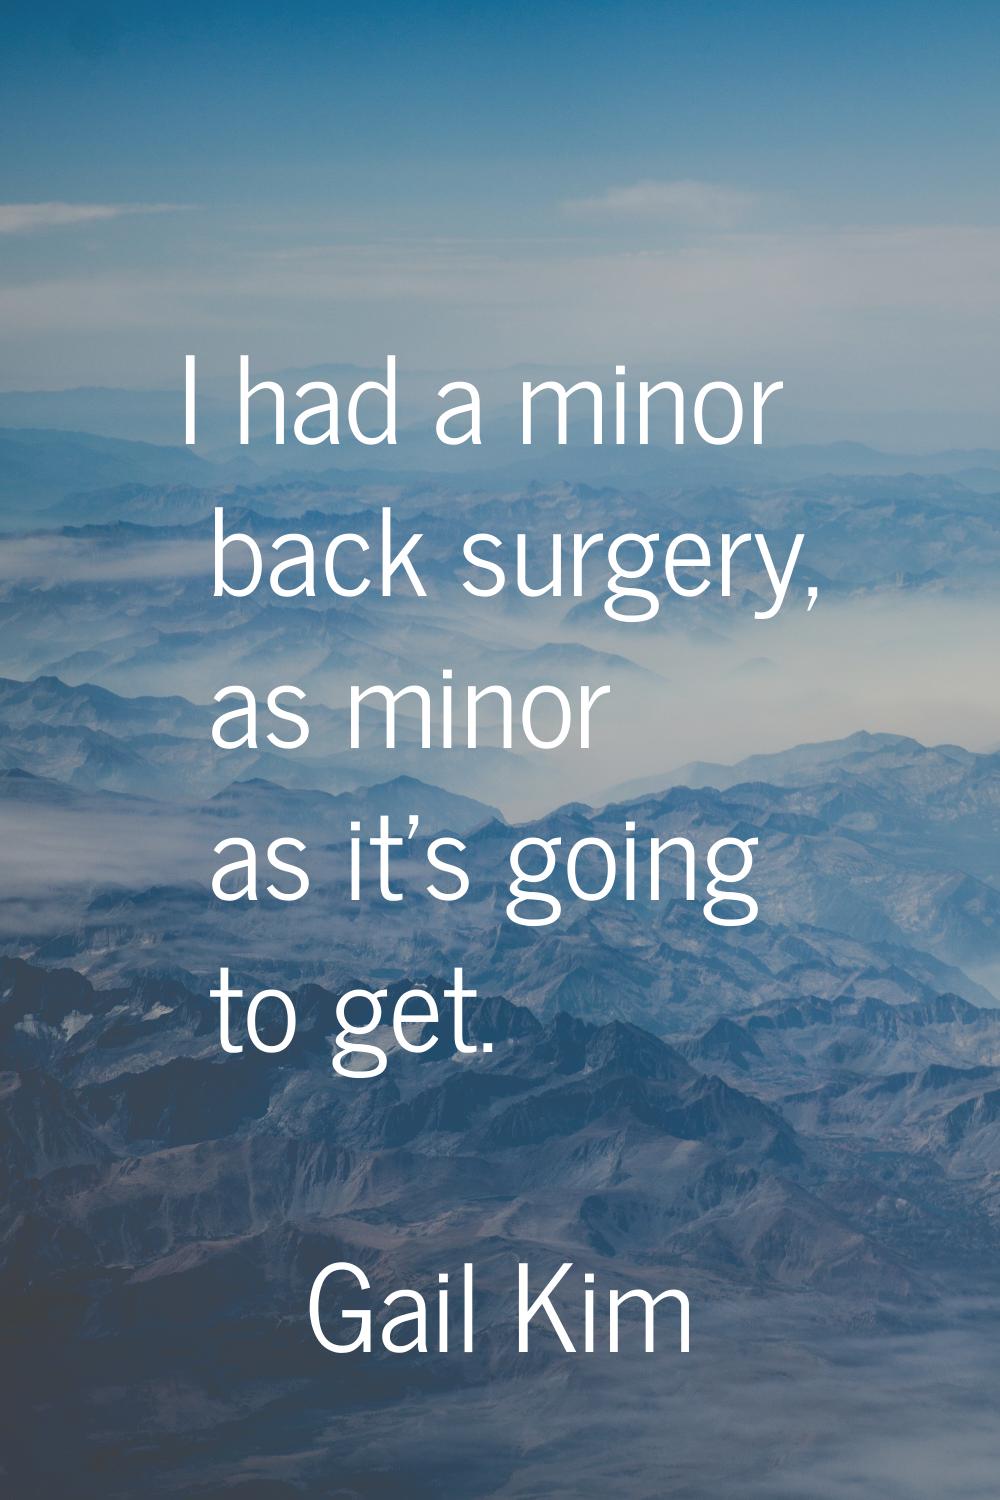 I had a minor back surgery, as minor as it's going to get.